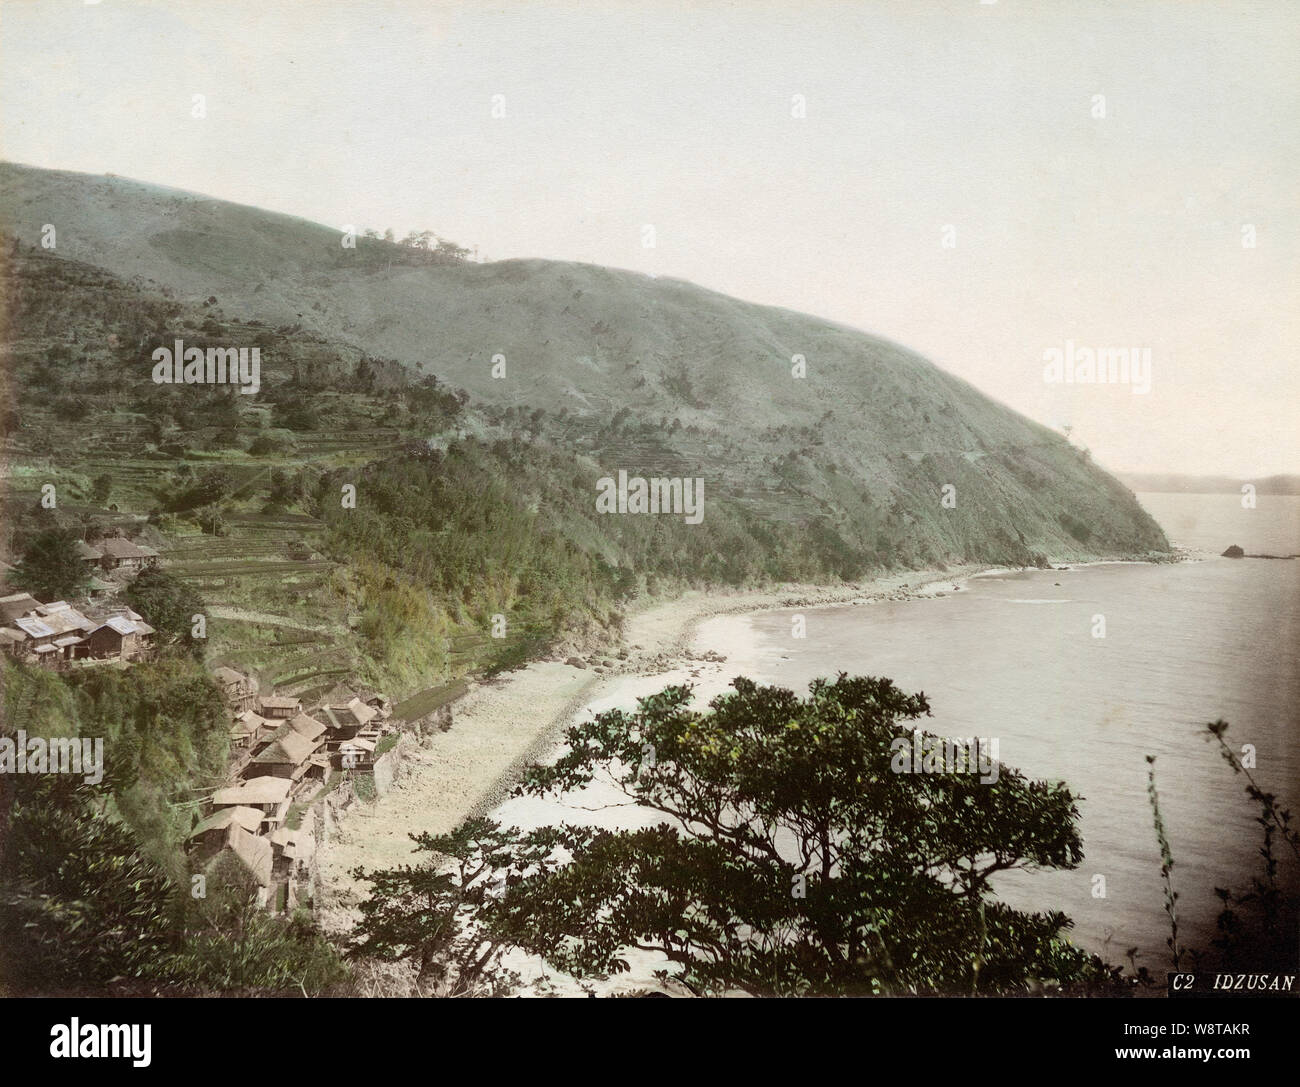 [ 1880s Japan - Japanese Coast at Atami, Shizuoka ] —   Panoramic view of the spa town of Atami in the Izu Peninsula, Shizuoka Prefecture. Shogun Tokugawa Ieyasu bathed in these springs as early as the 16th century and the spa resort was a popular destination for samurai and later the general public.  19th century vintage albumen photograph. Stock Photo